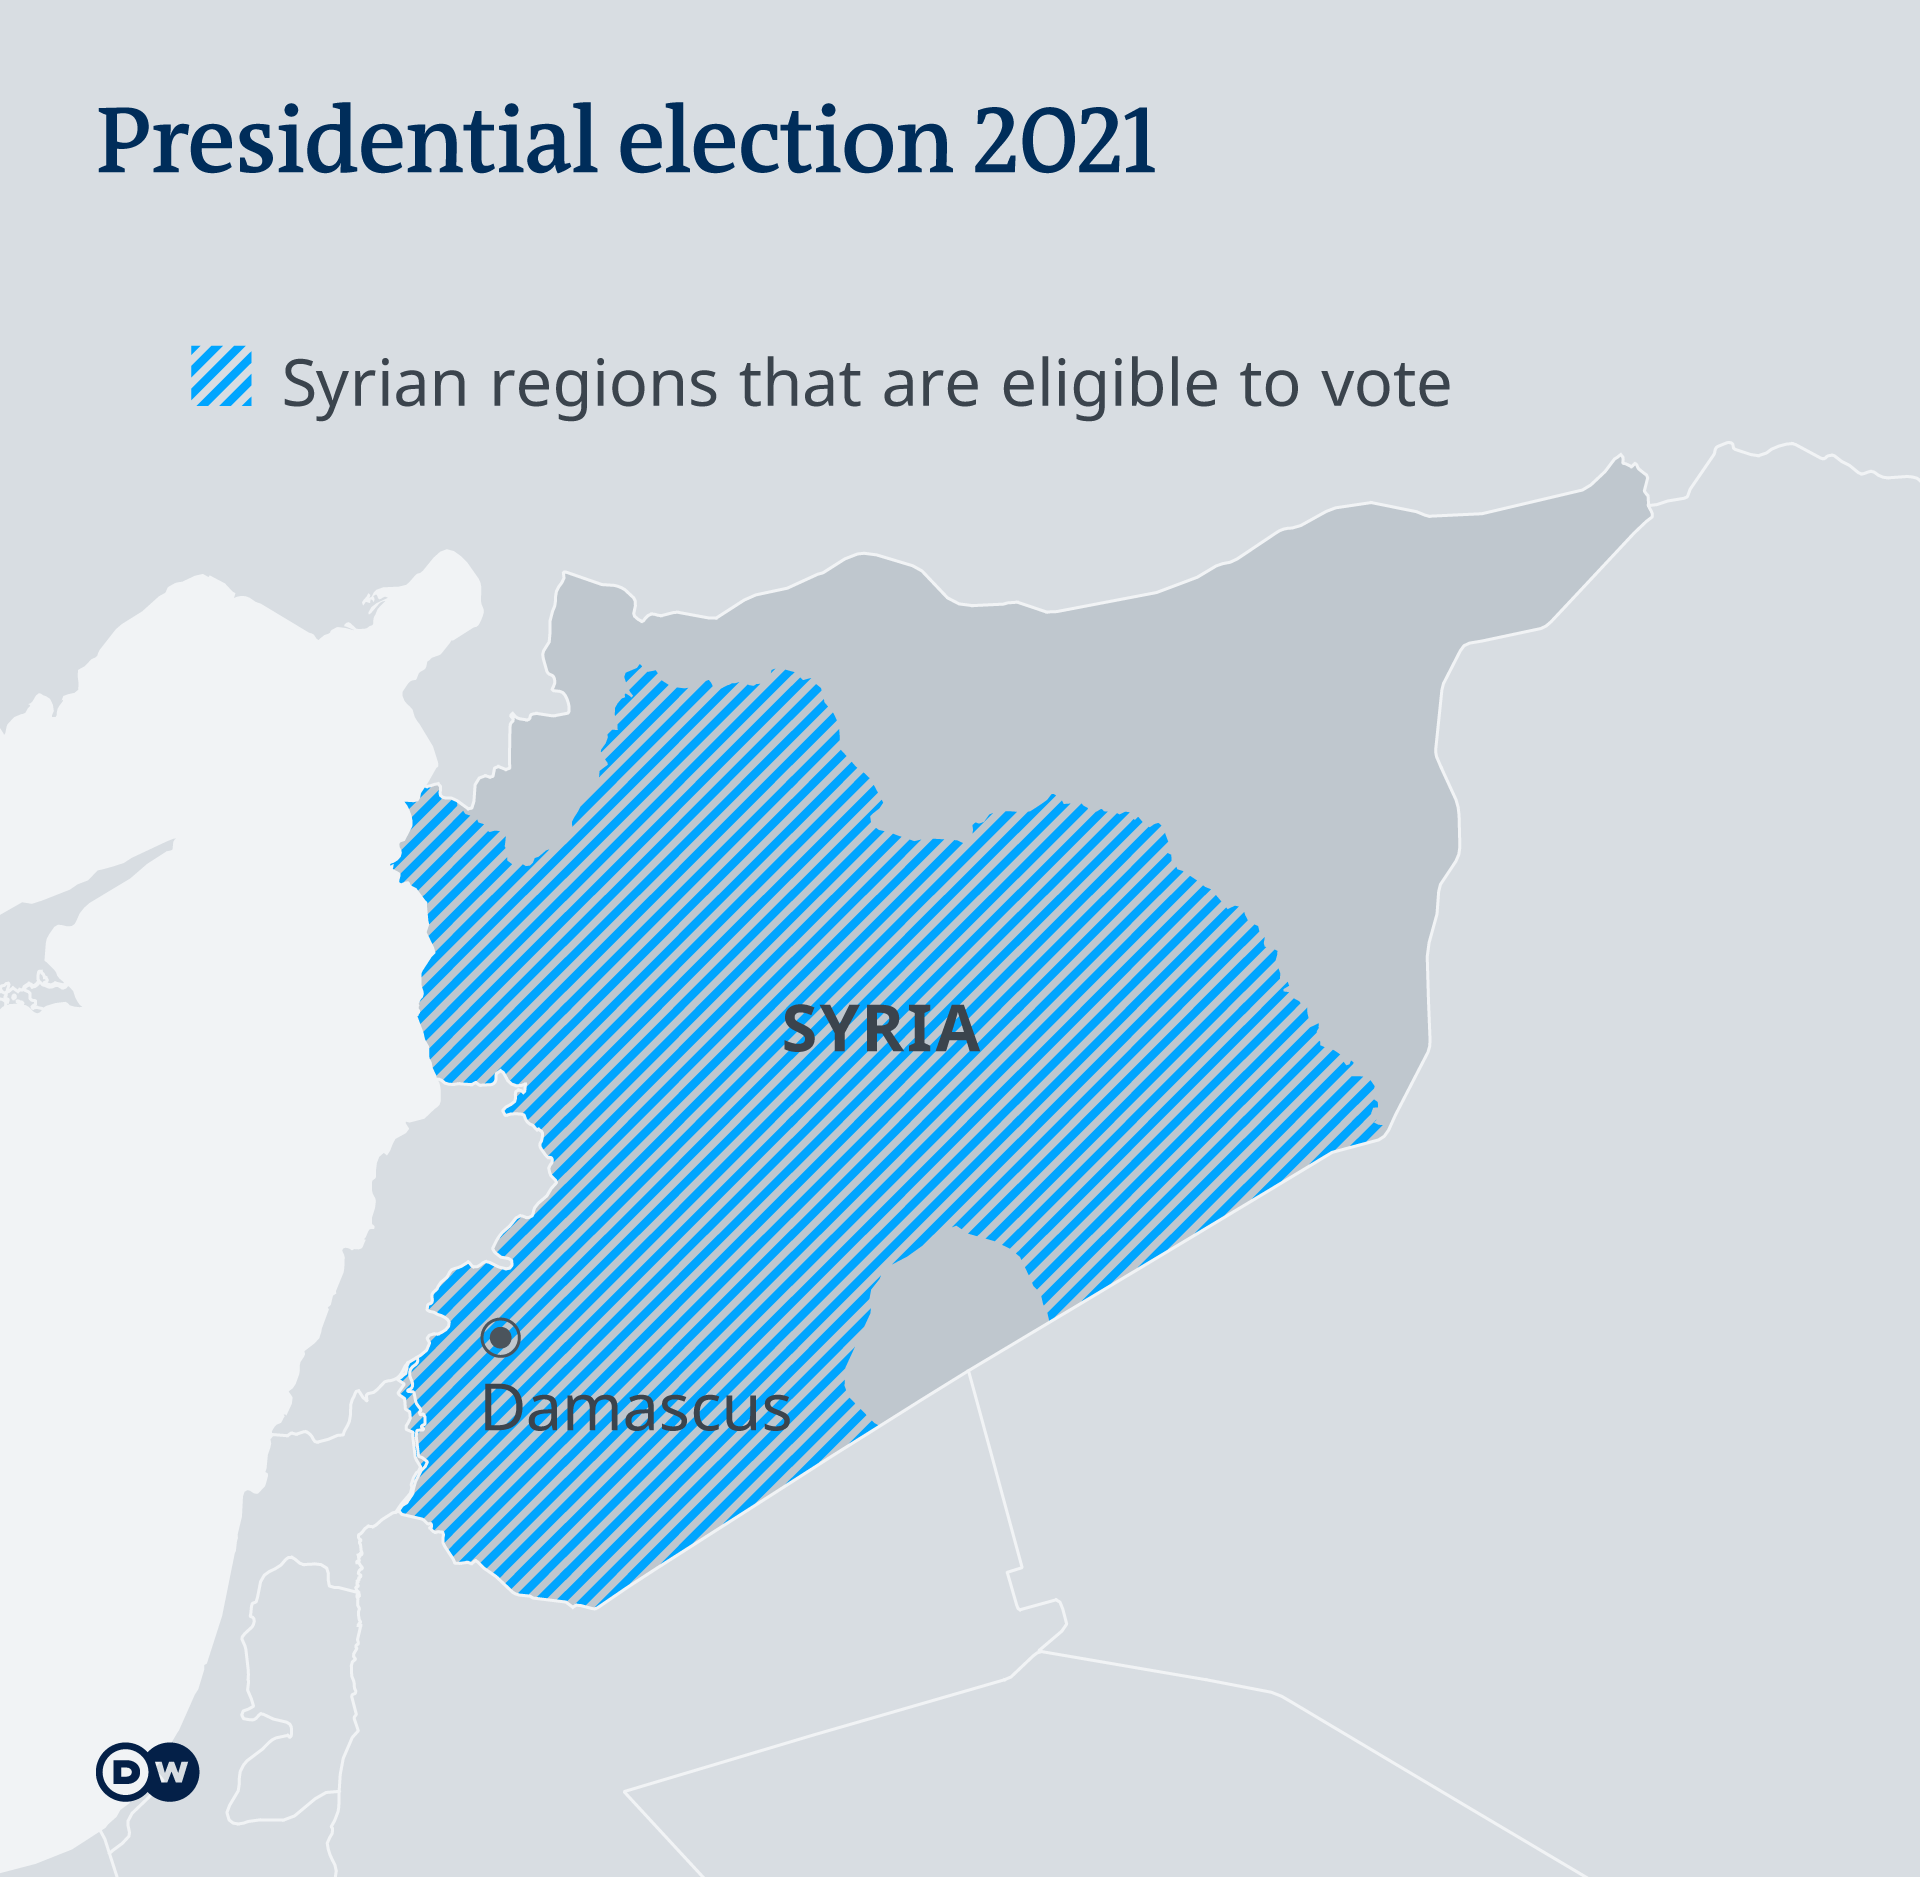 Syria S Sham Election Guarantees 1 Thing Bashar Assad Will Win Middle East News And Analysis Of Events In The Arab World Dw 25 05 2021 [ 1877 x 1920 Pixel ]